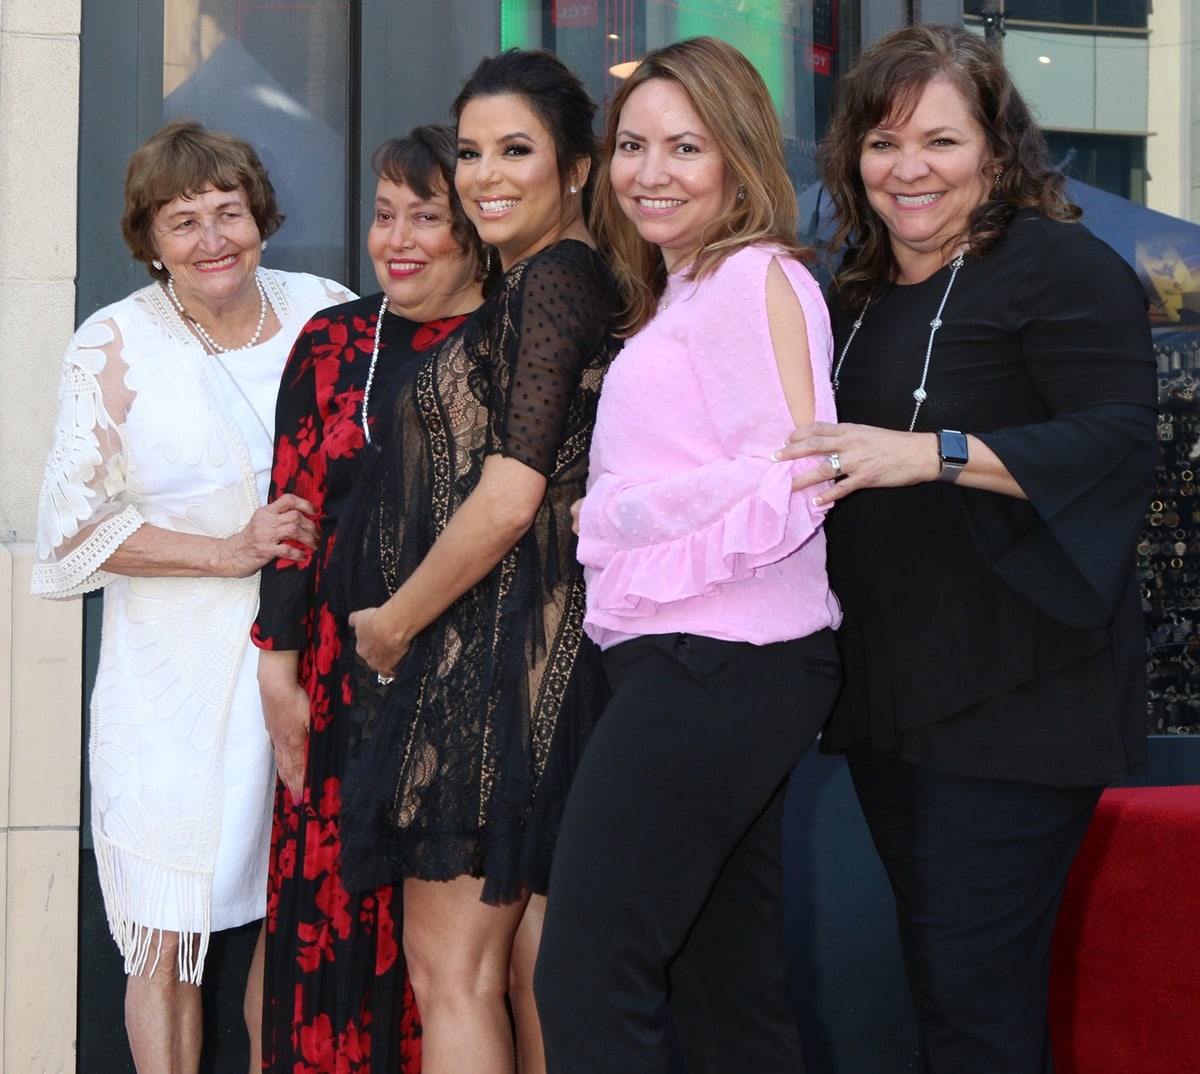 The youngest of four siblings, Eva Longoria grew up with her older sisters Esmeralda, Elizabeth, and Emily, and their mother, Ella Eva Mireles, on a ranch in Corpus Christi, Texas